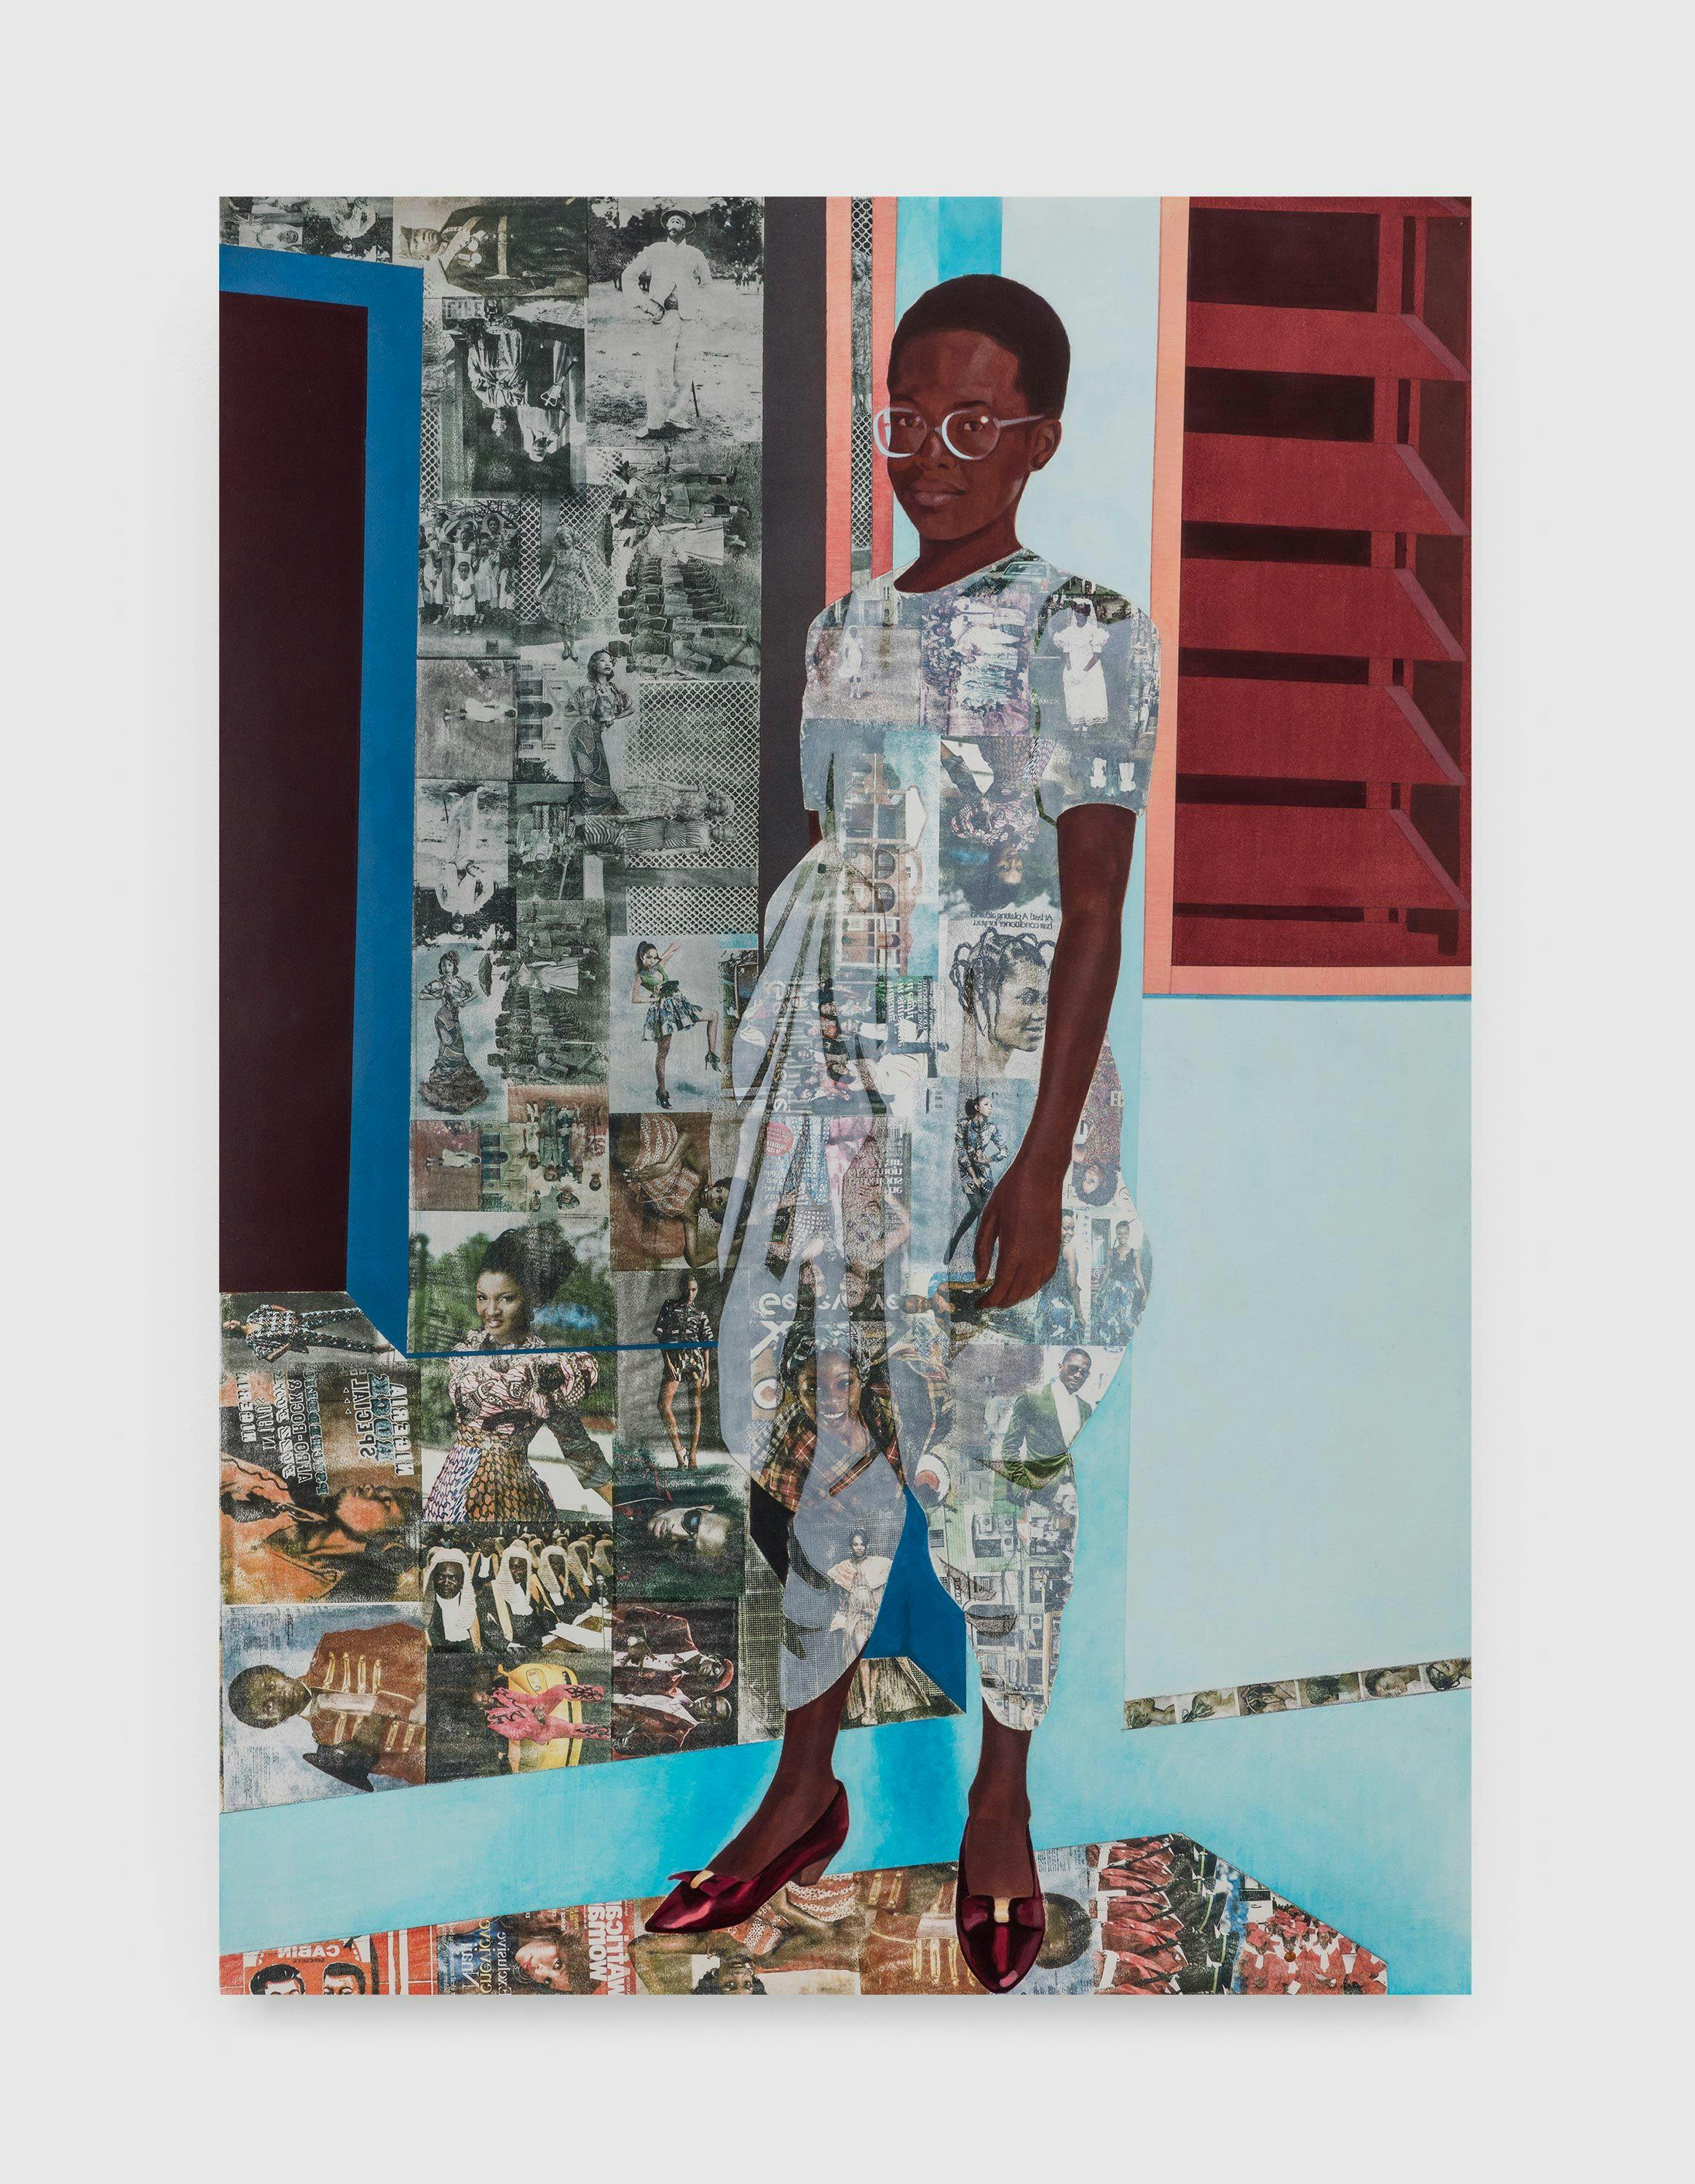 A work on paper by Njideka Akunyili Crosby, titled "The Beautyful Ones" Series #1c, dated 2014.